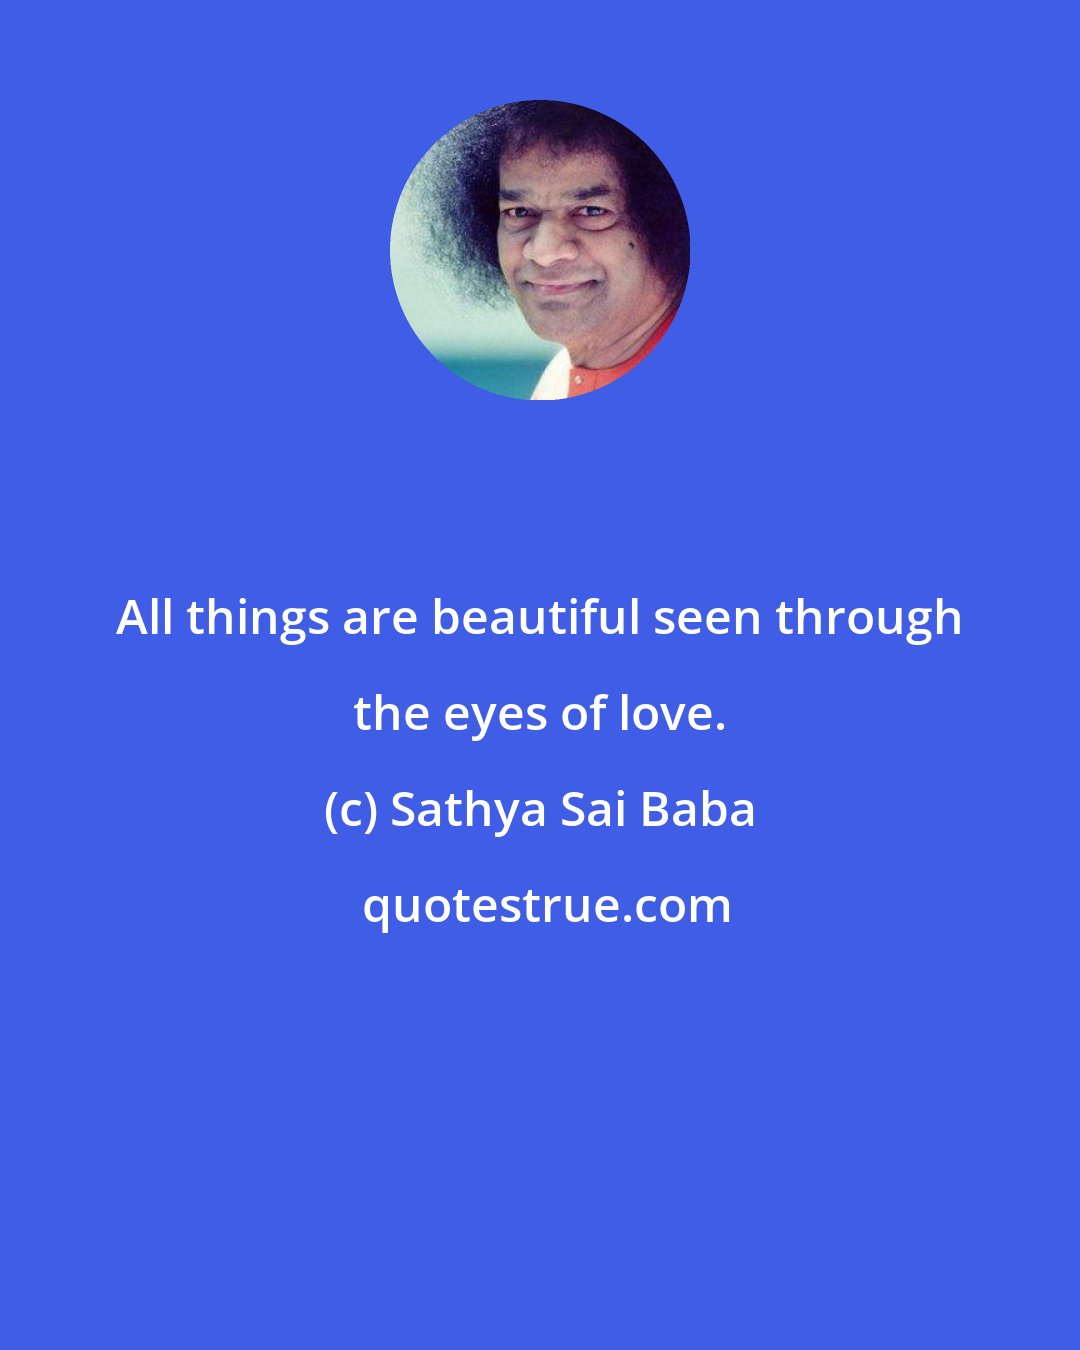 Sathya Sai Baba: All things are beautiful seen through the eyes of love.